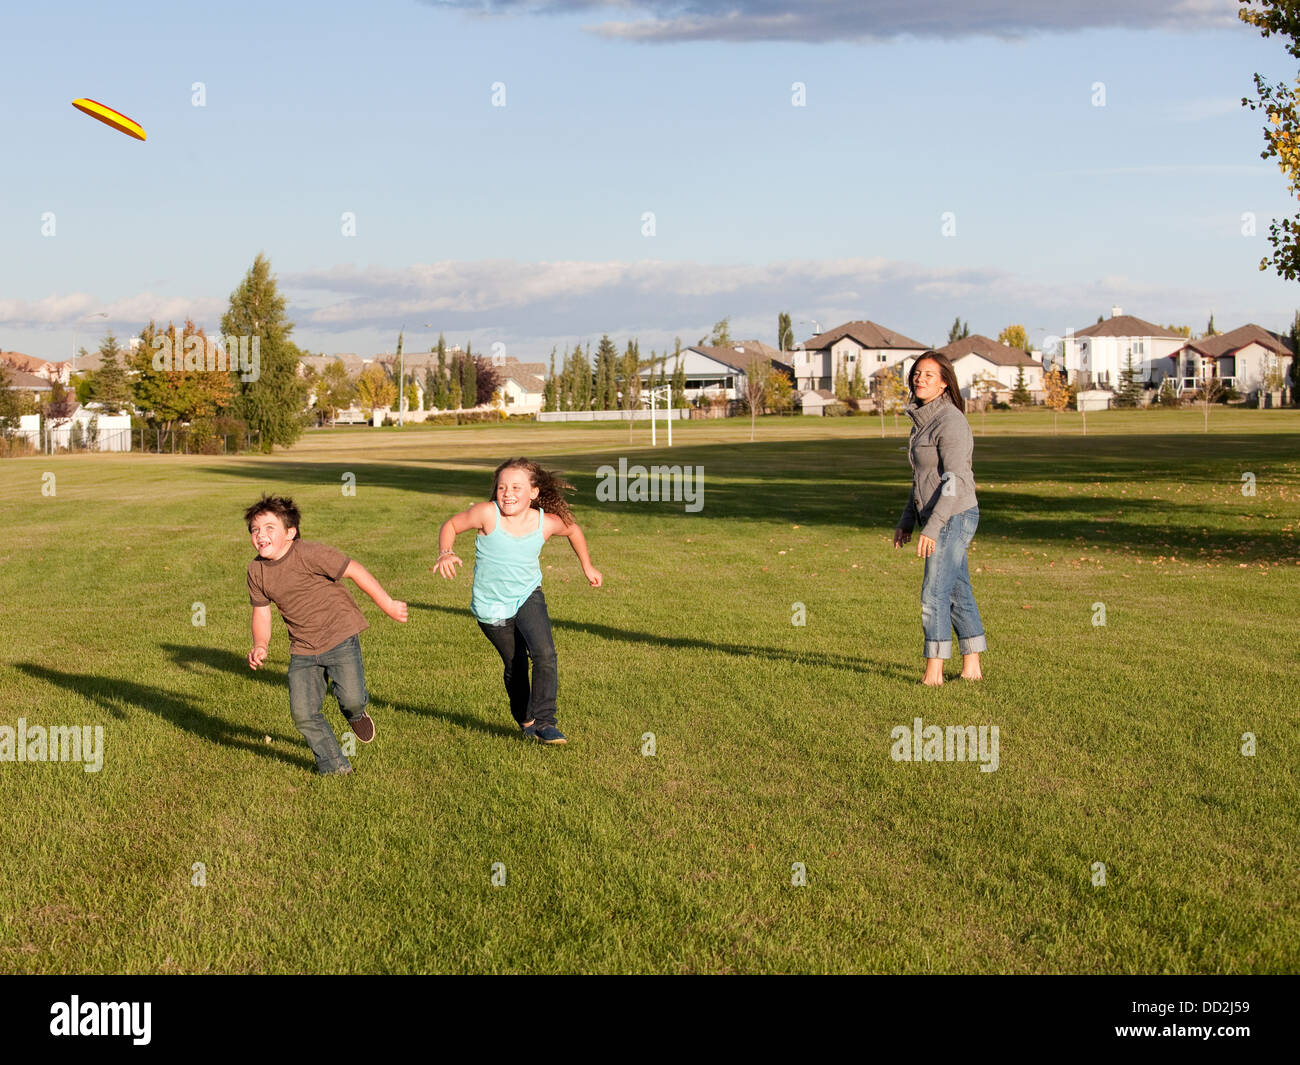 Mother Throwing Flying Disc To Children In A Park; Beaumont, Alberta, Canada Stock Photo